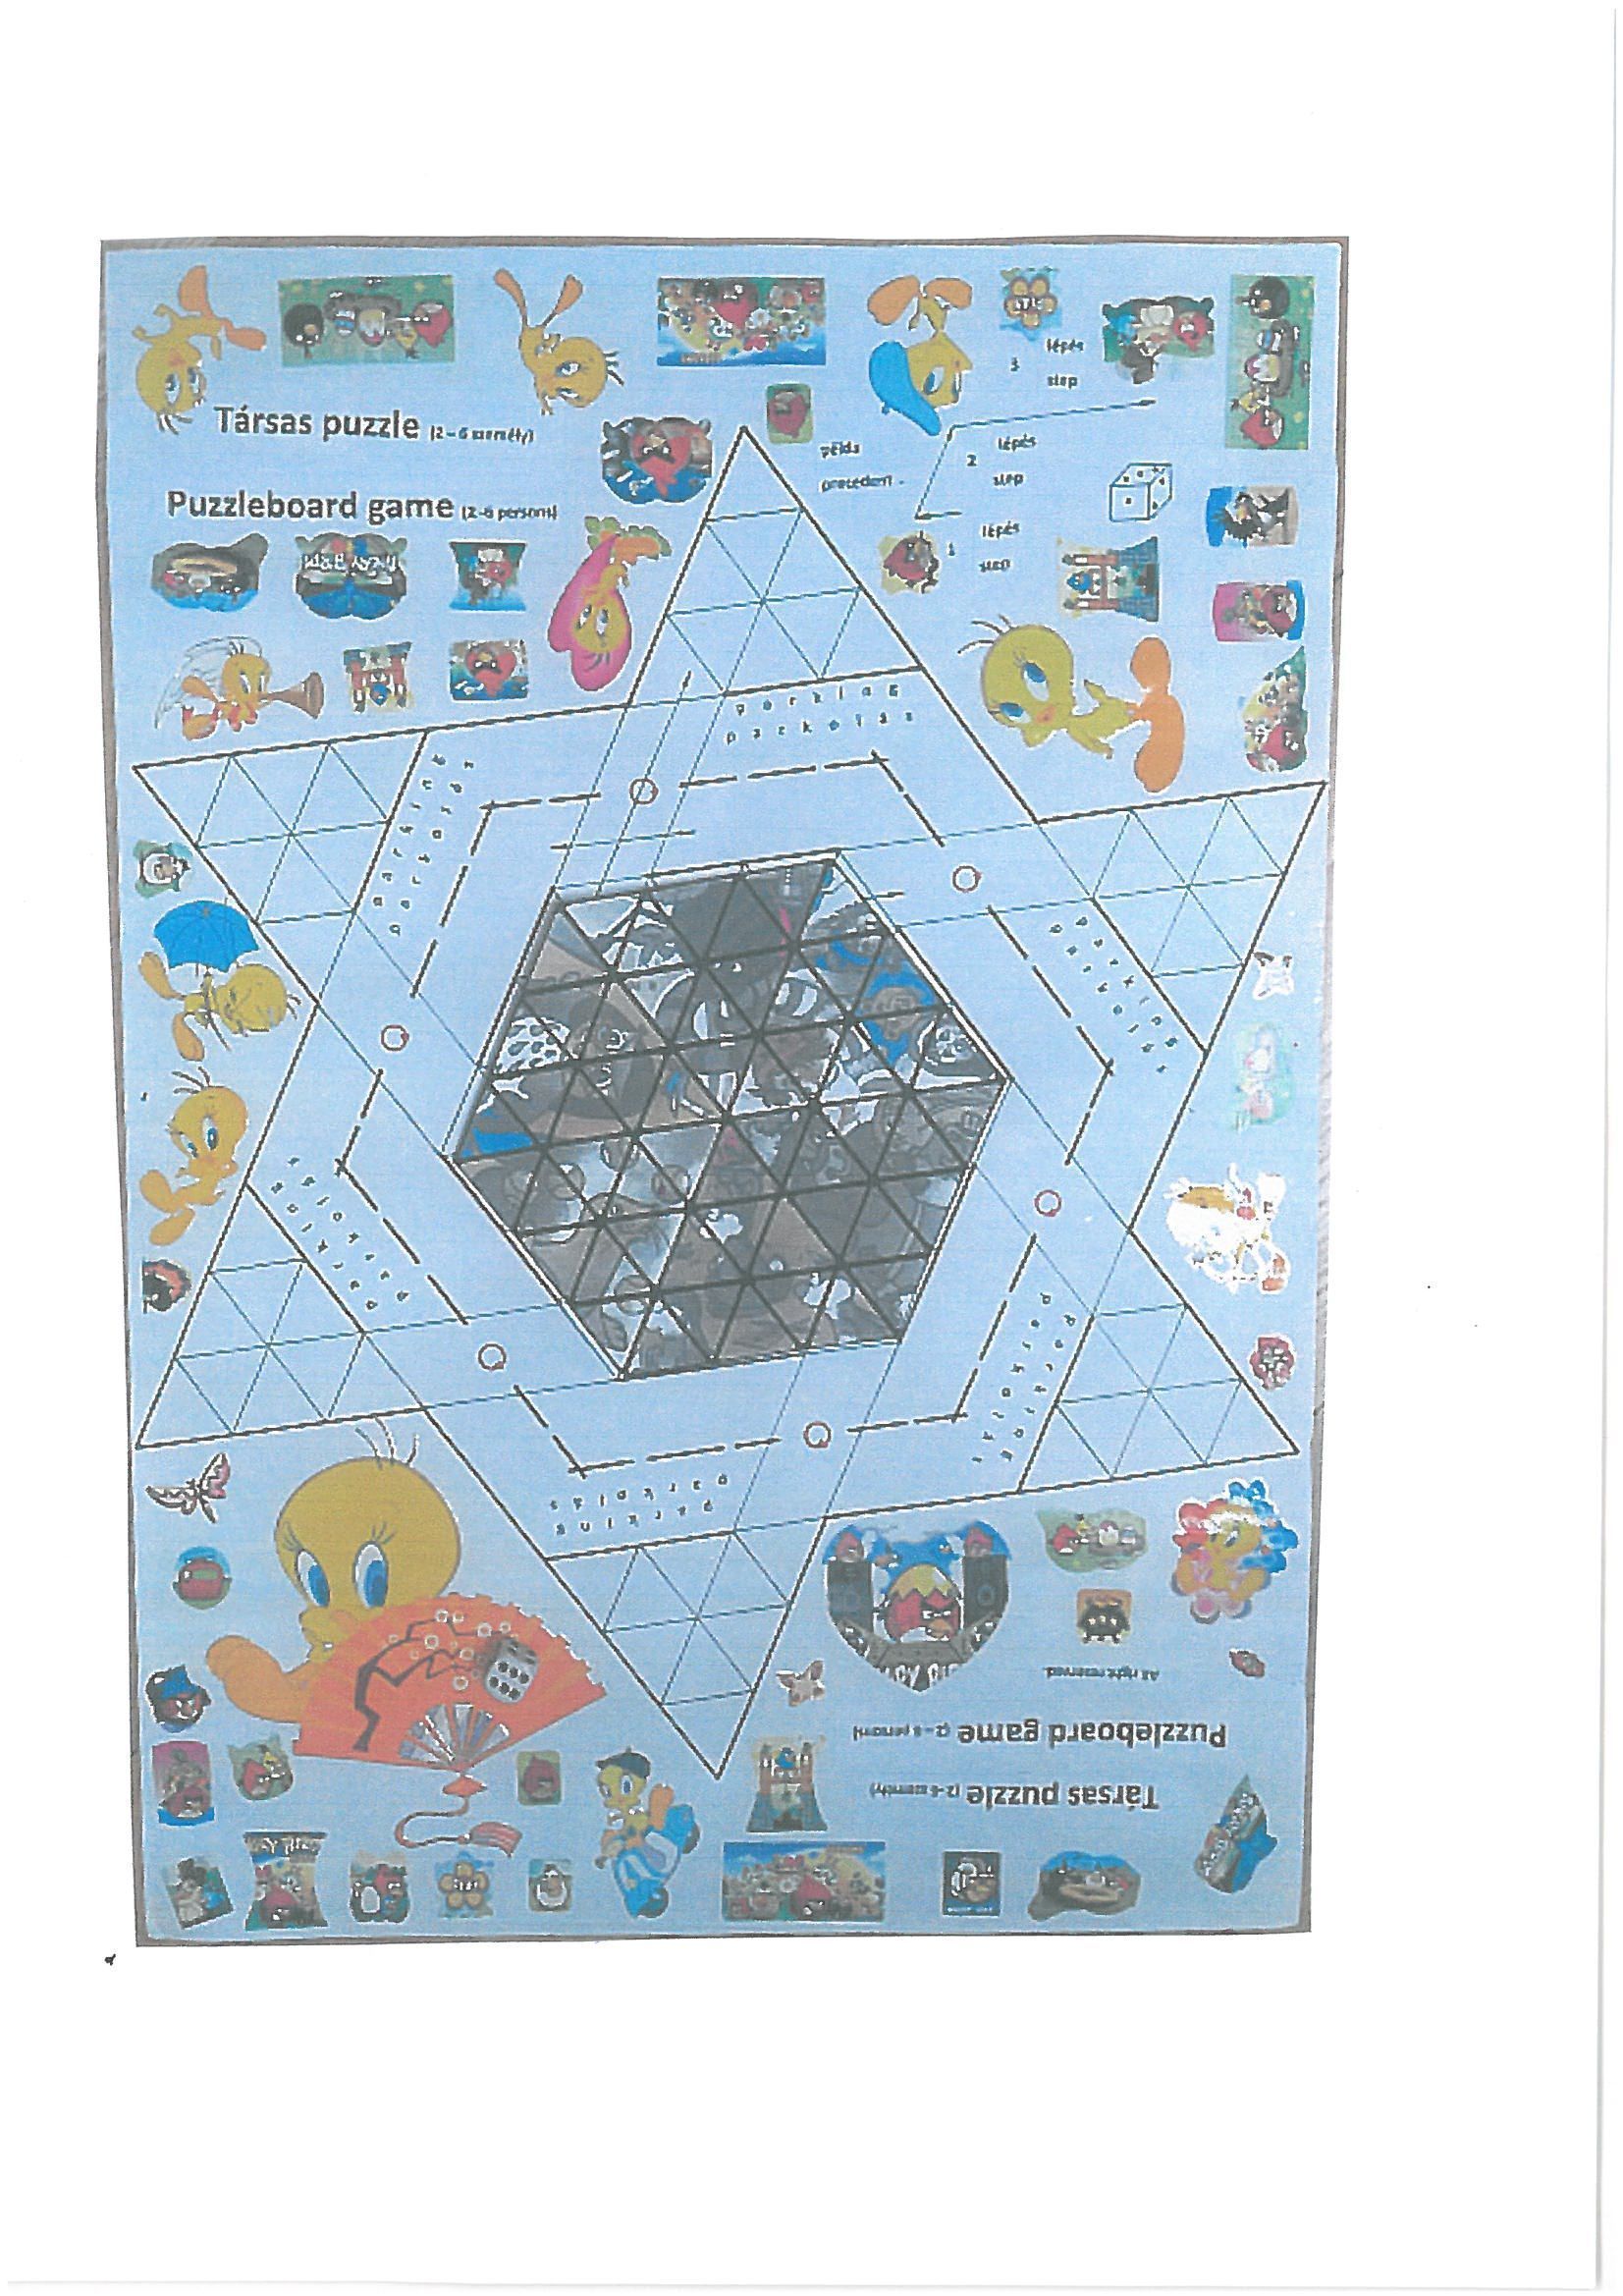 Puzzleboard game